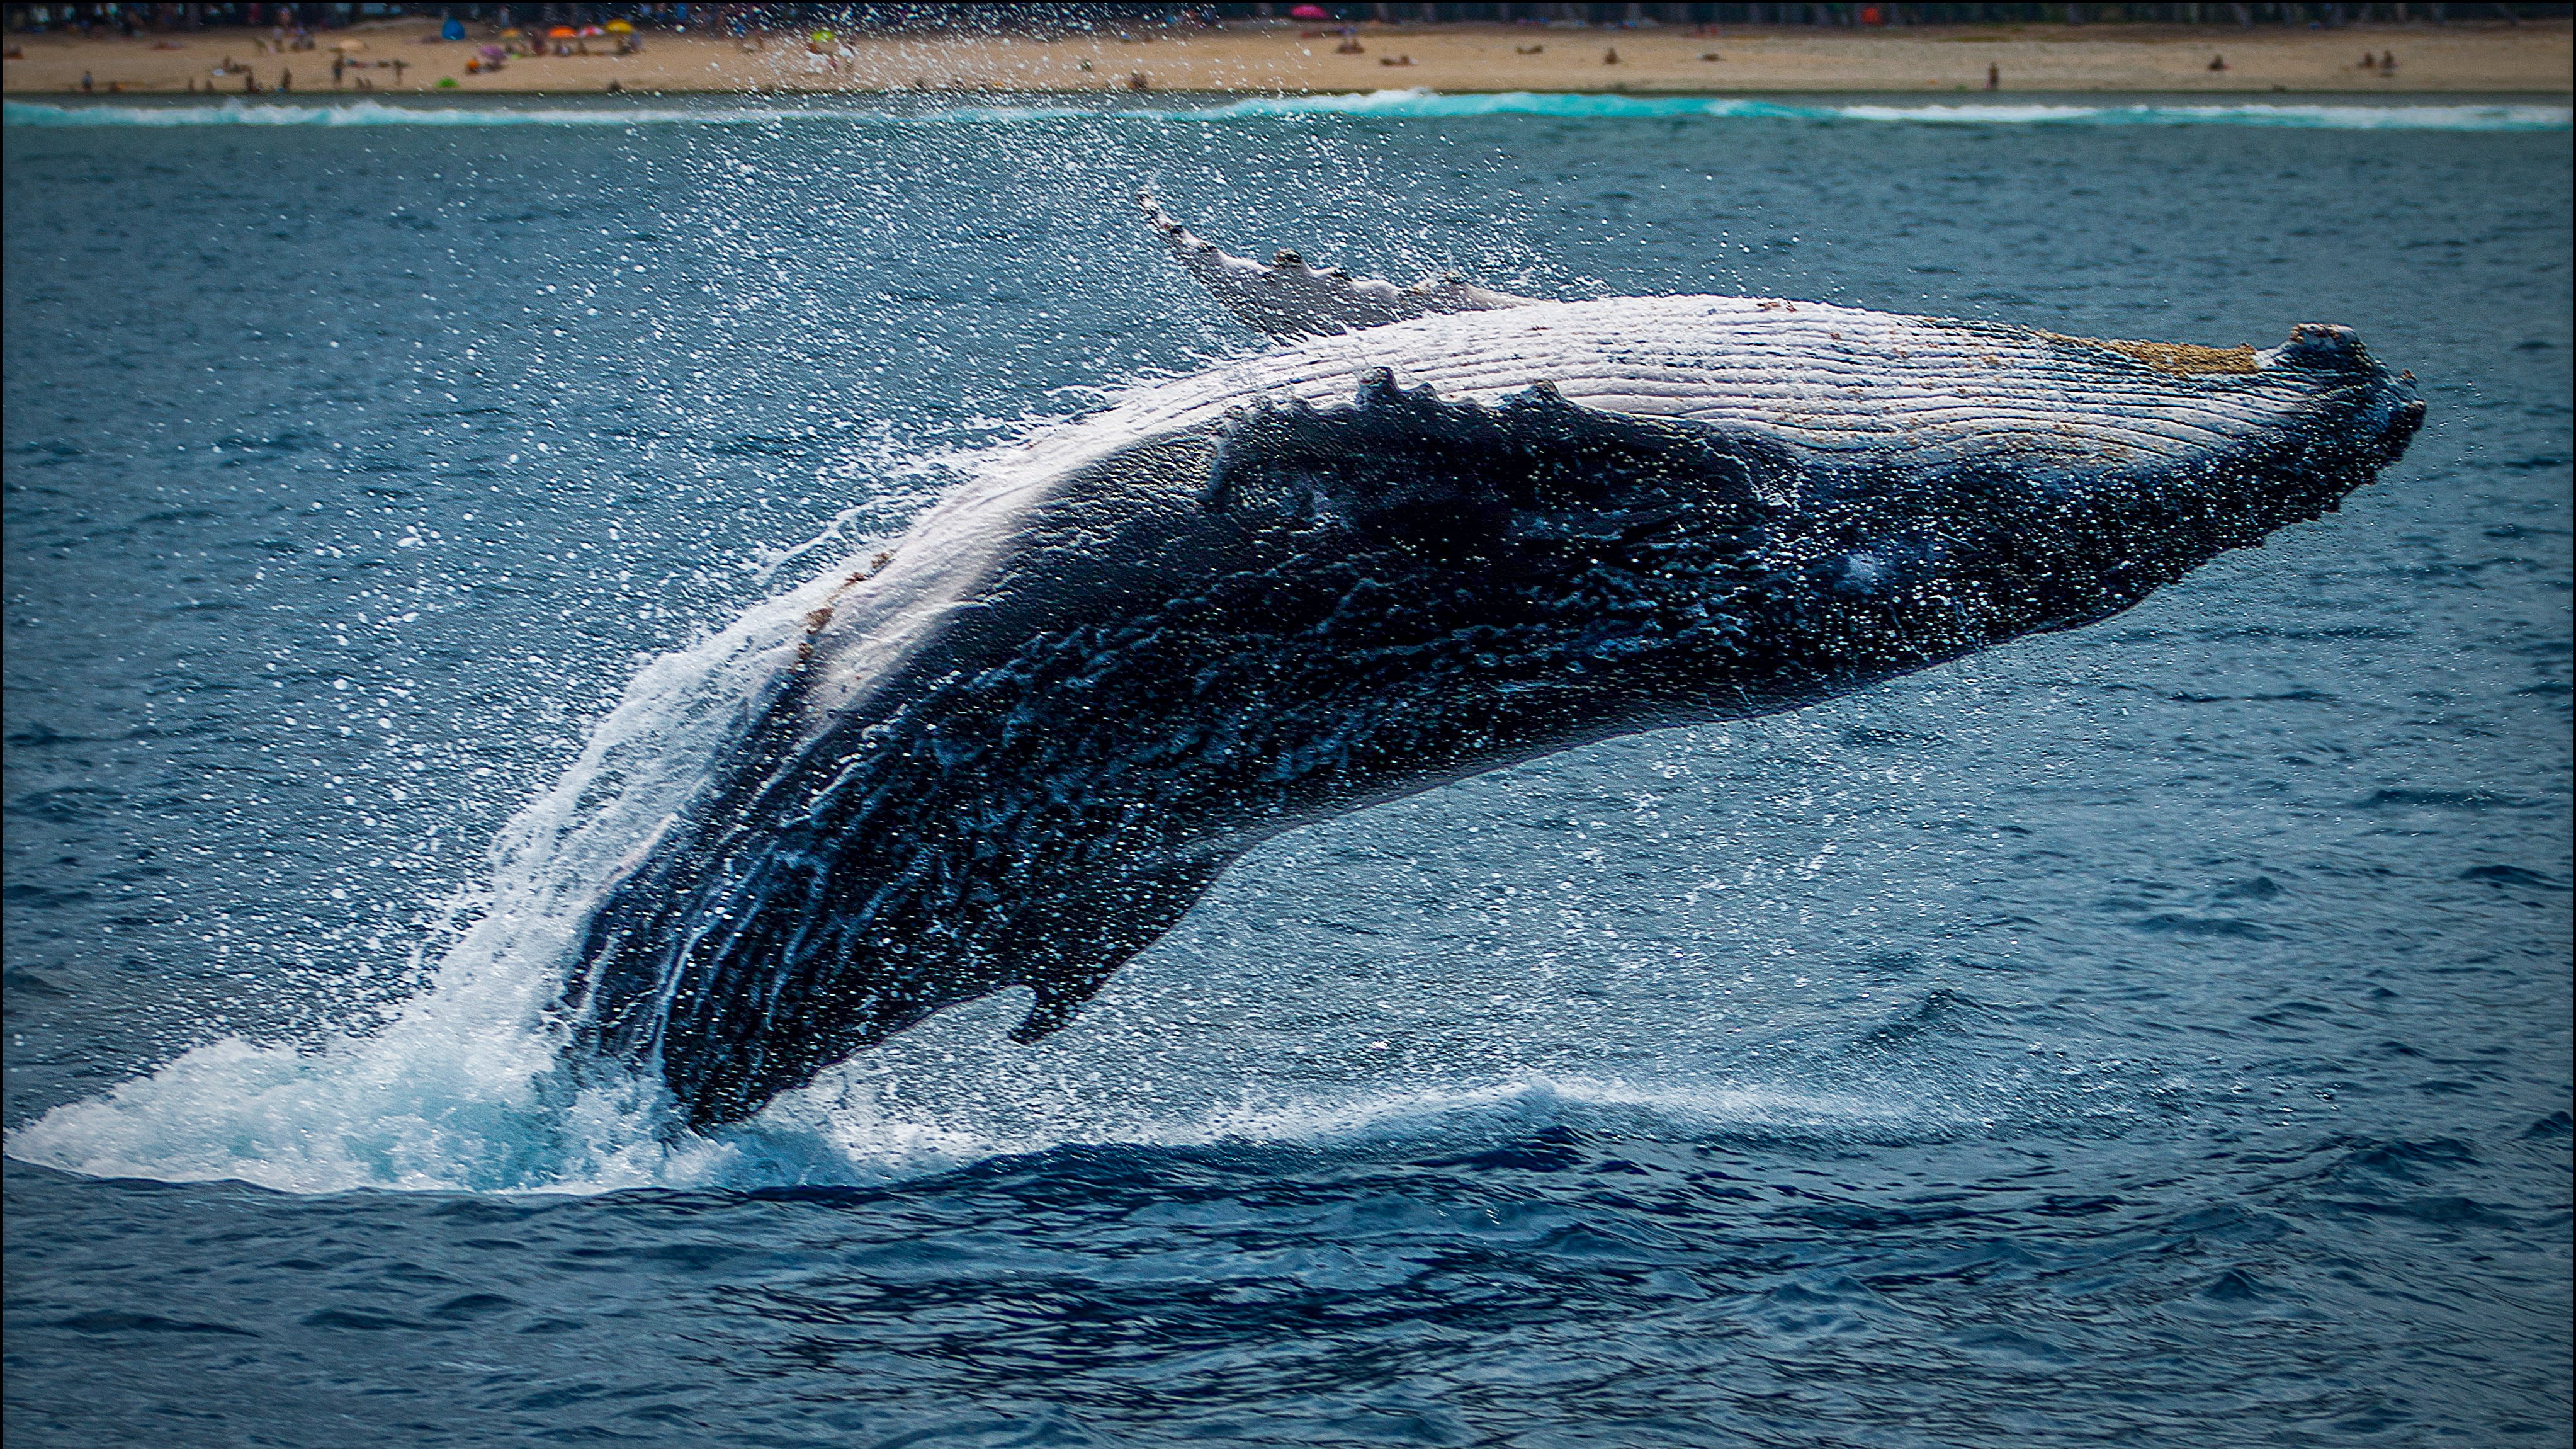 Bitcoin Bearish Signal: Whale Ratio Continues To Stay At High Value